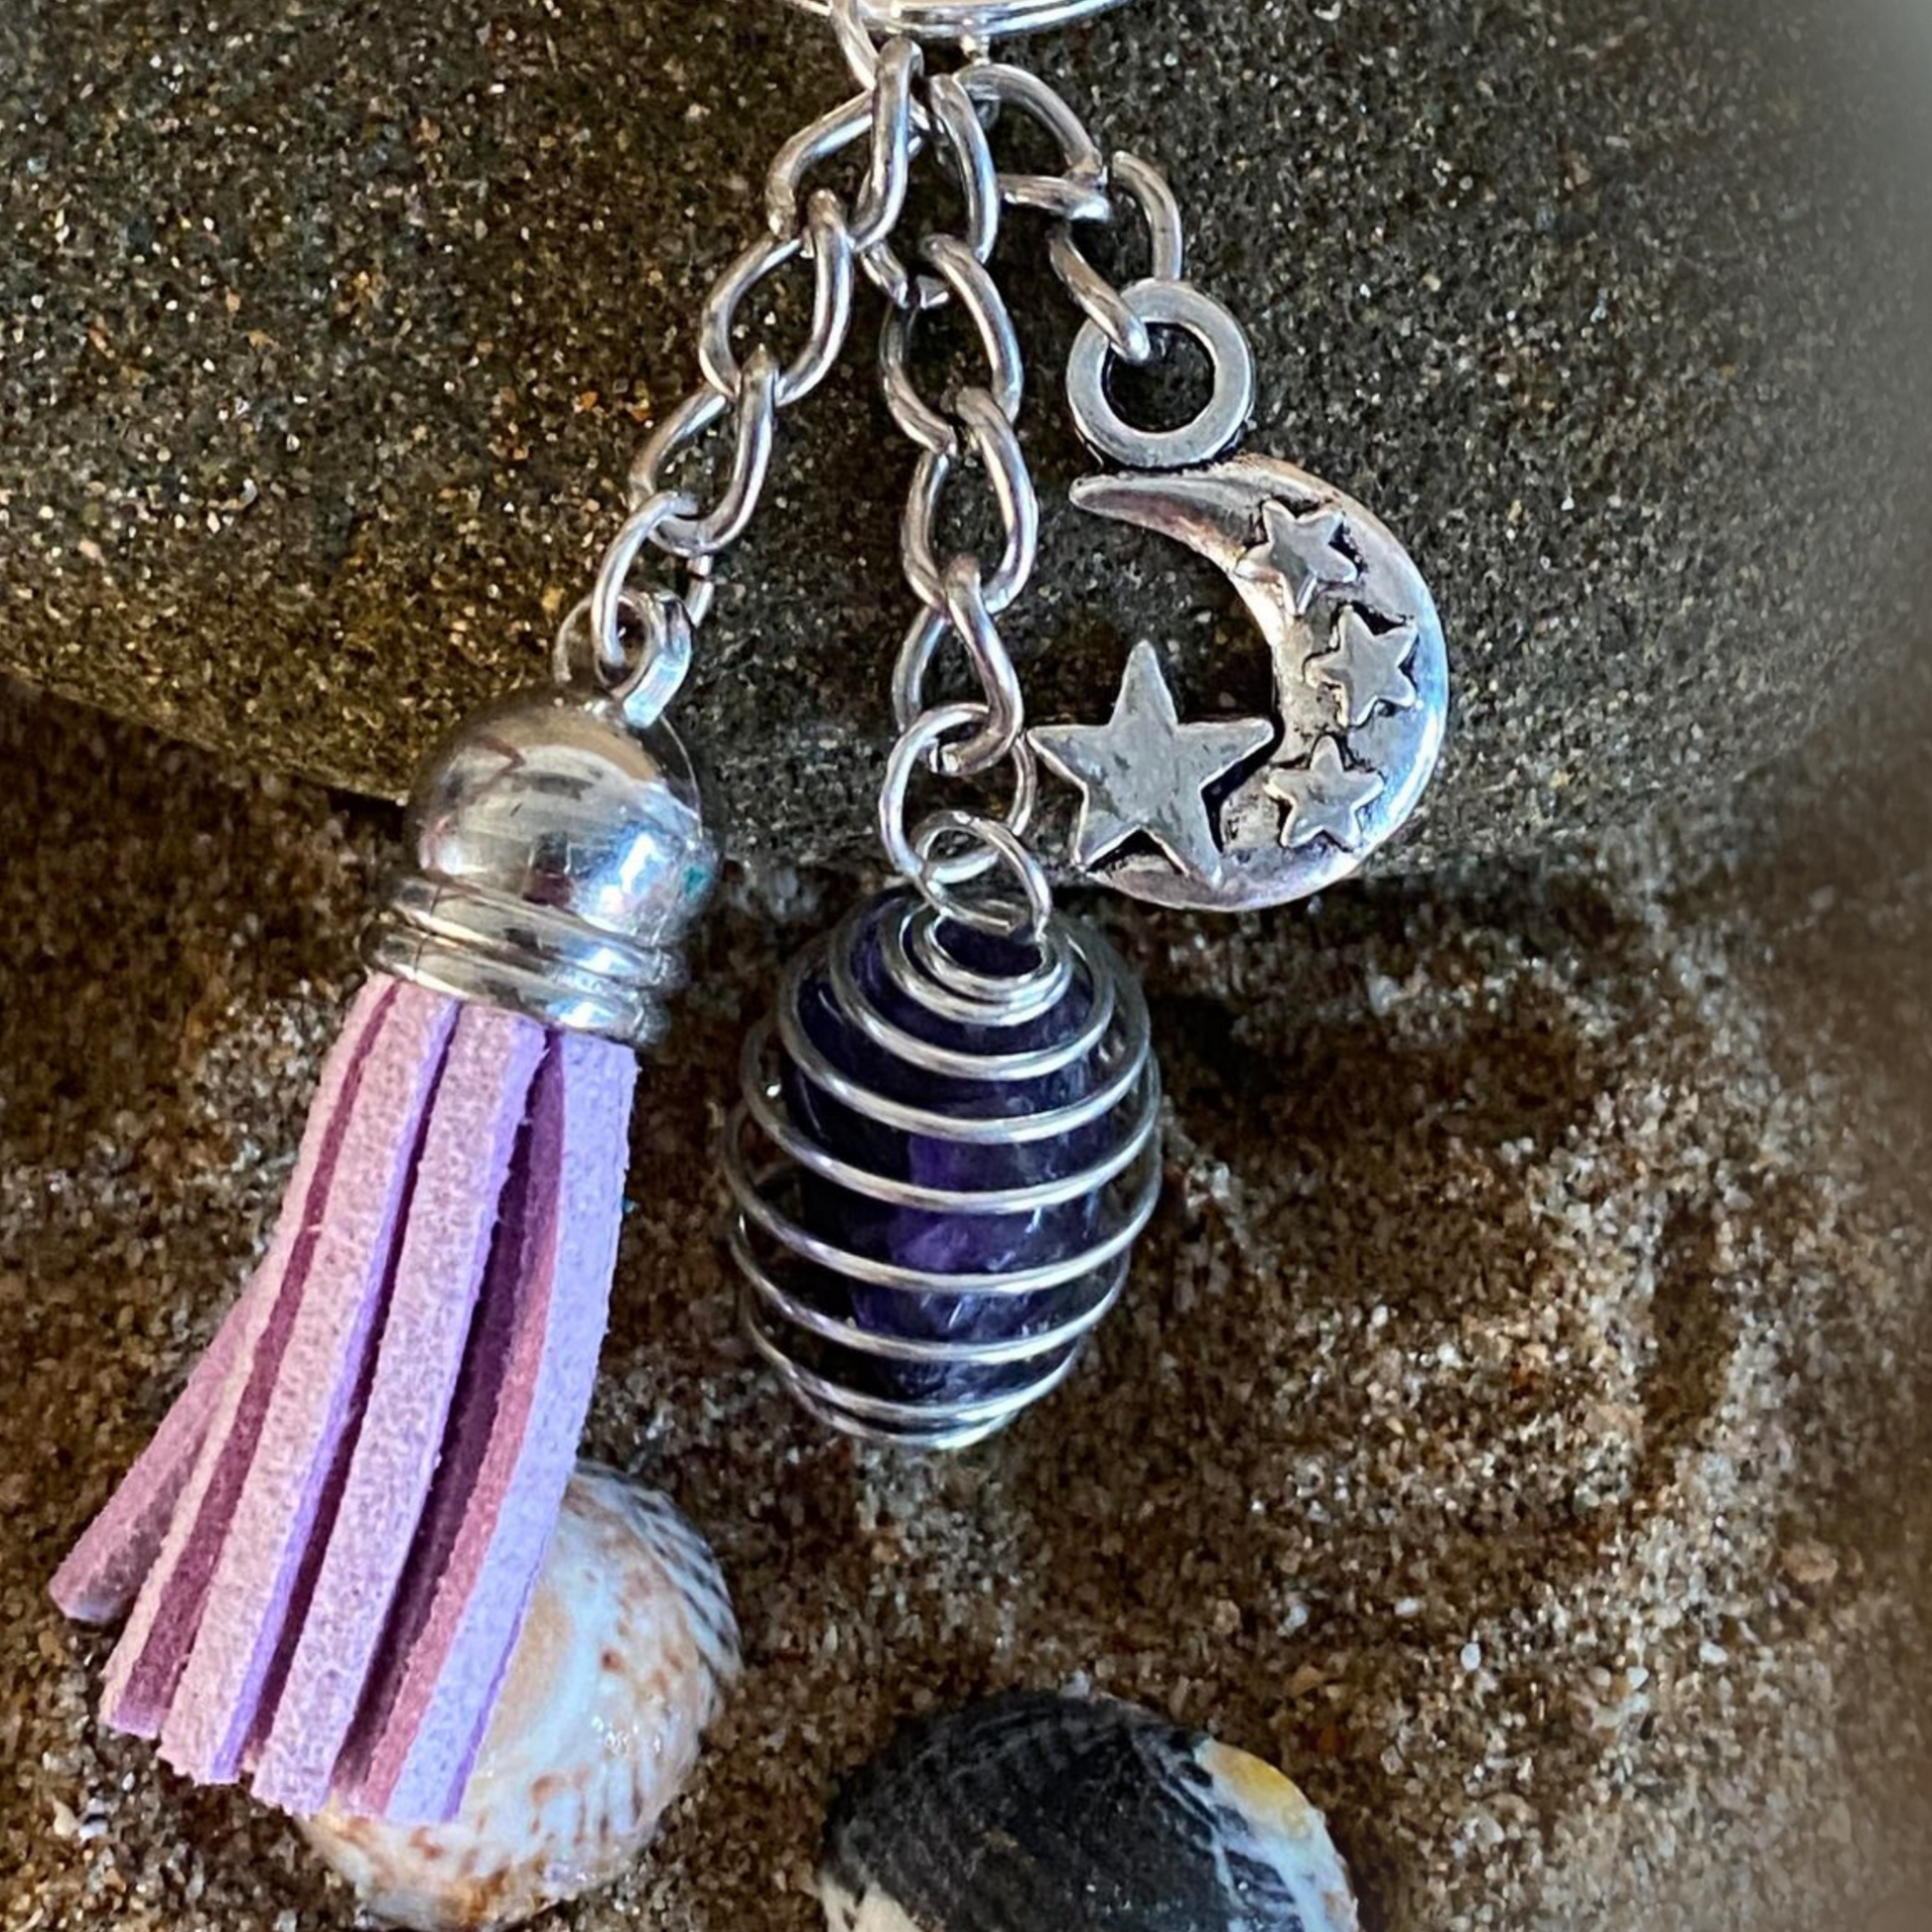 Spiral Cage Keyring with Amethyst Tumble Stone, Light Purple Tassel and Charm